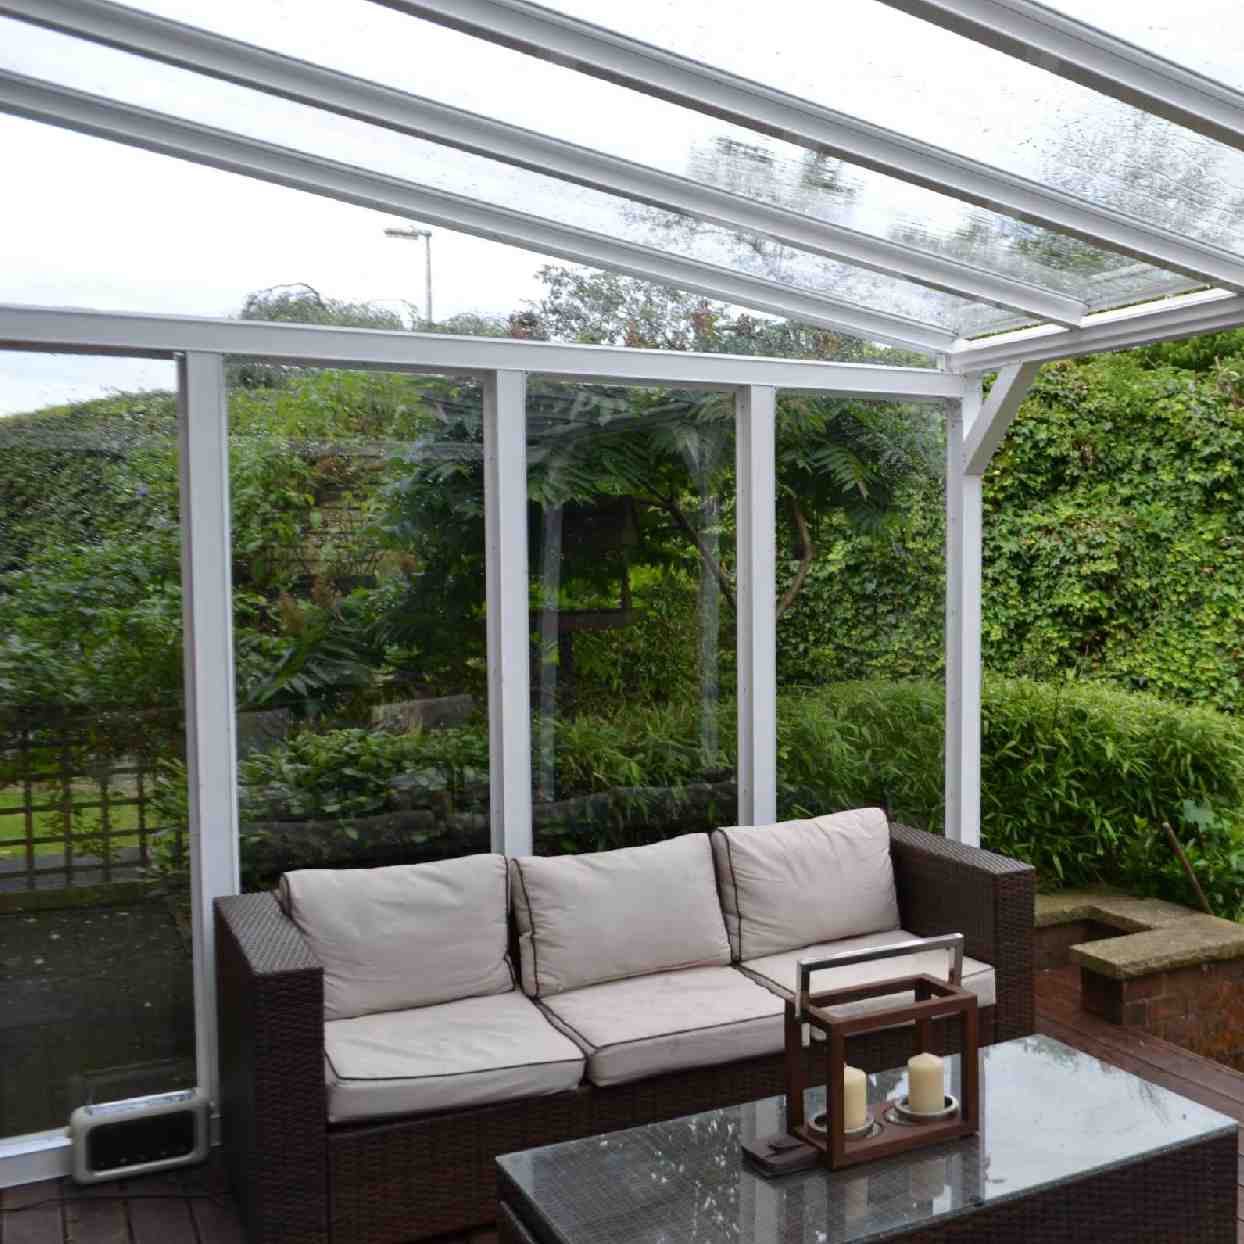 Buy Omega Verandah White with 16mm Polycarbonate Glazing - 12.0m (W) x 3.0m (P), (5) Supporting Posts online today